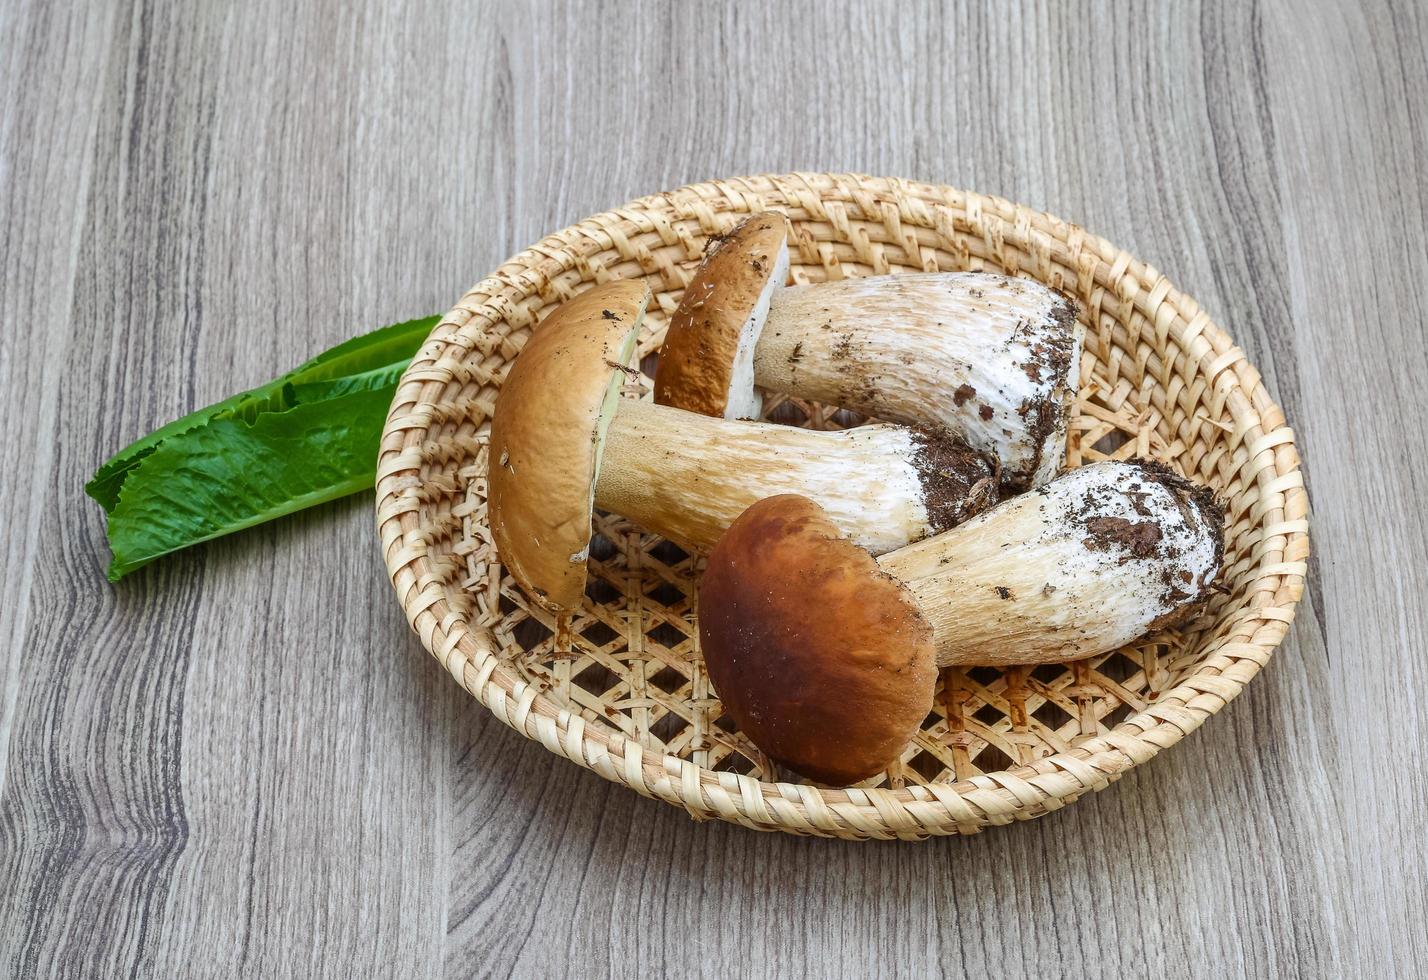 Wild Mushrooms in a basket on wooden background photo